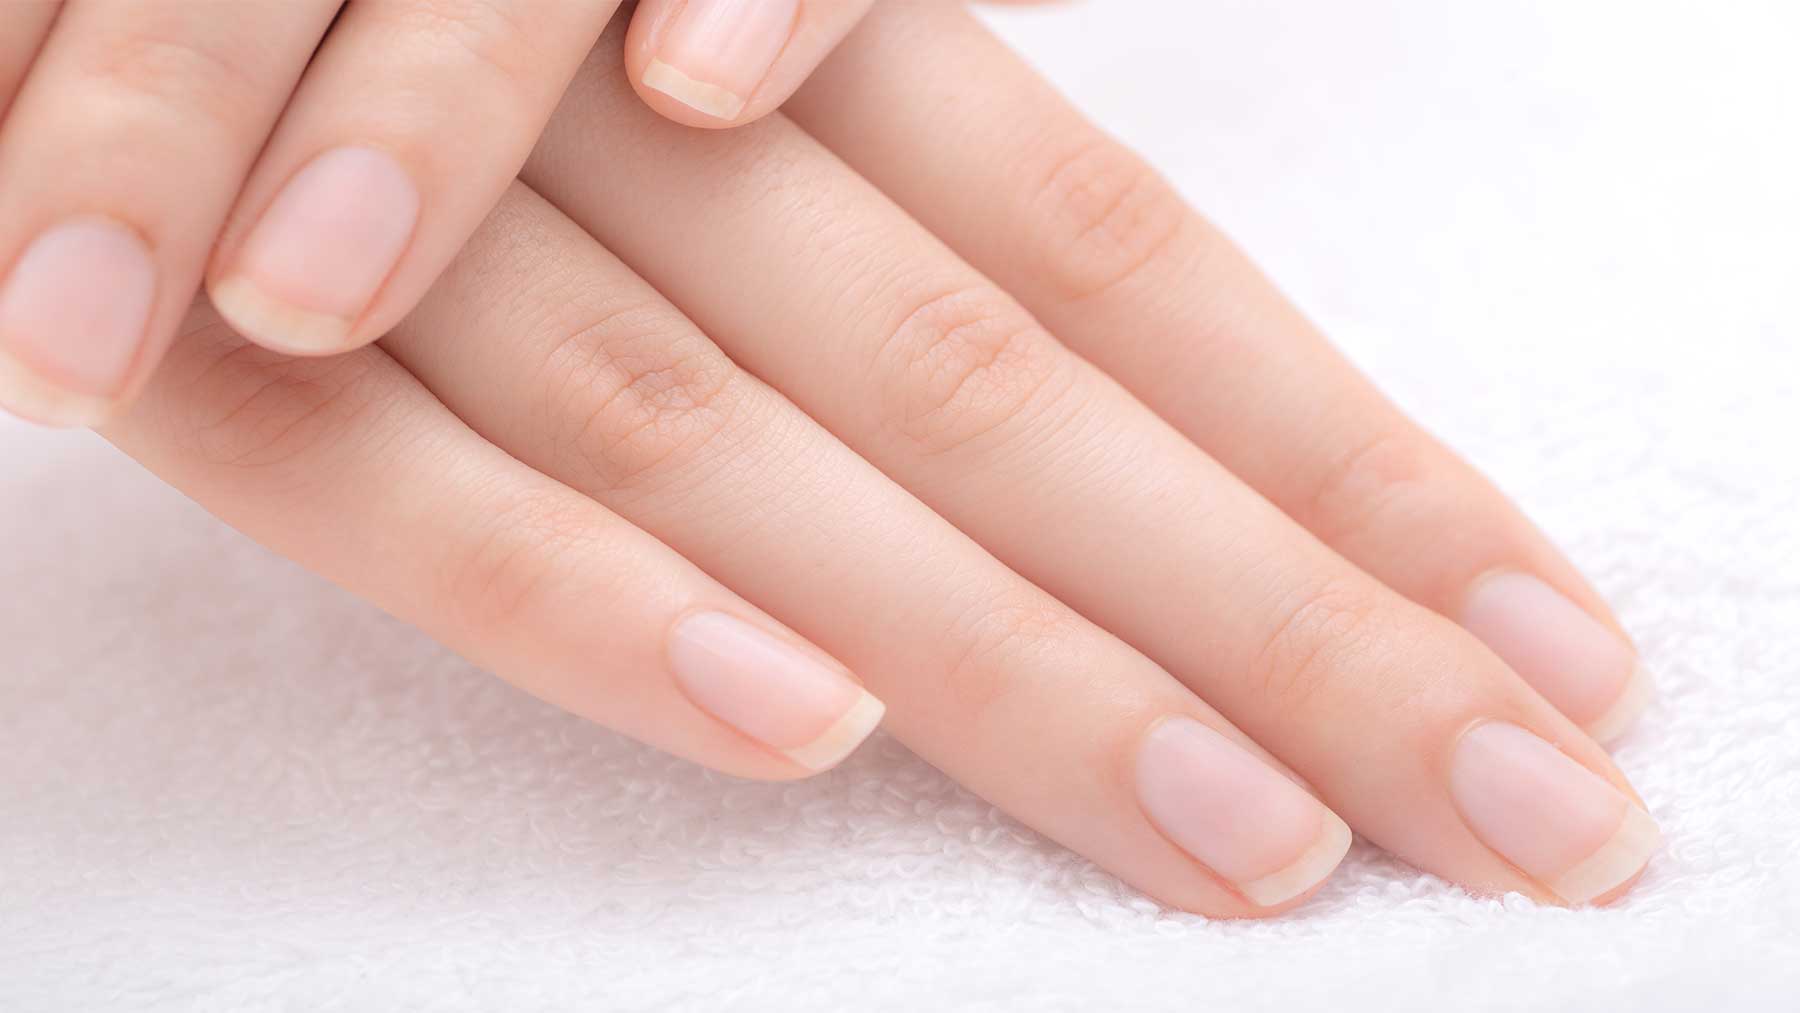 6. Long Natural Nail Coloration: How to Keep Your Nails Strong and Healthy - wide 7